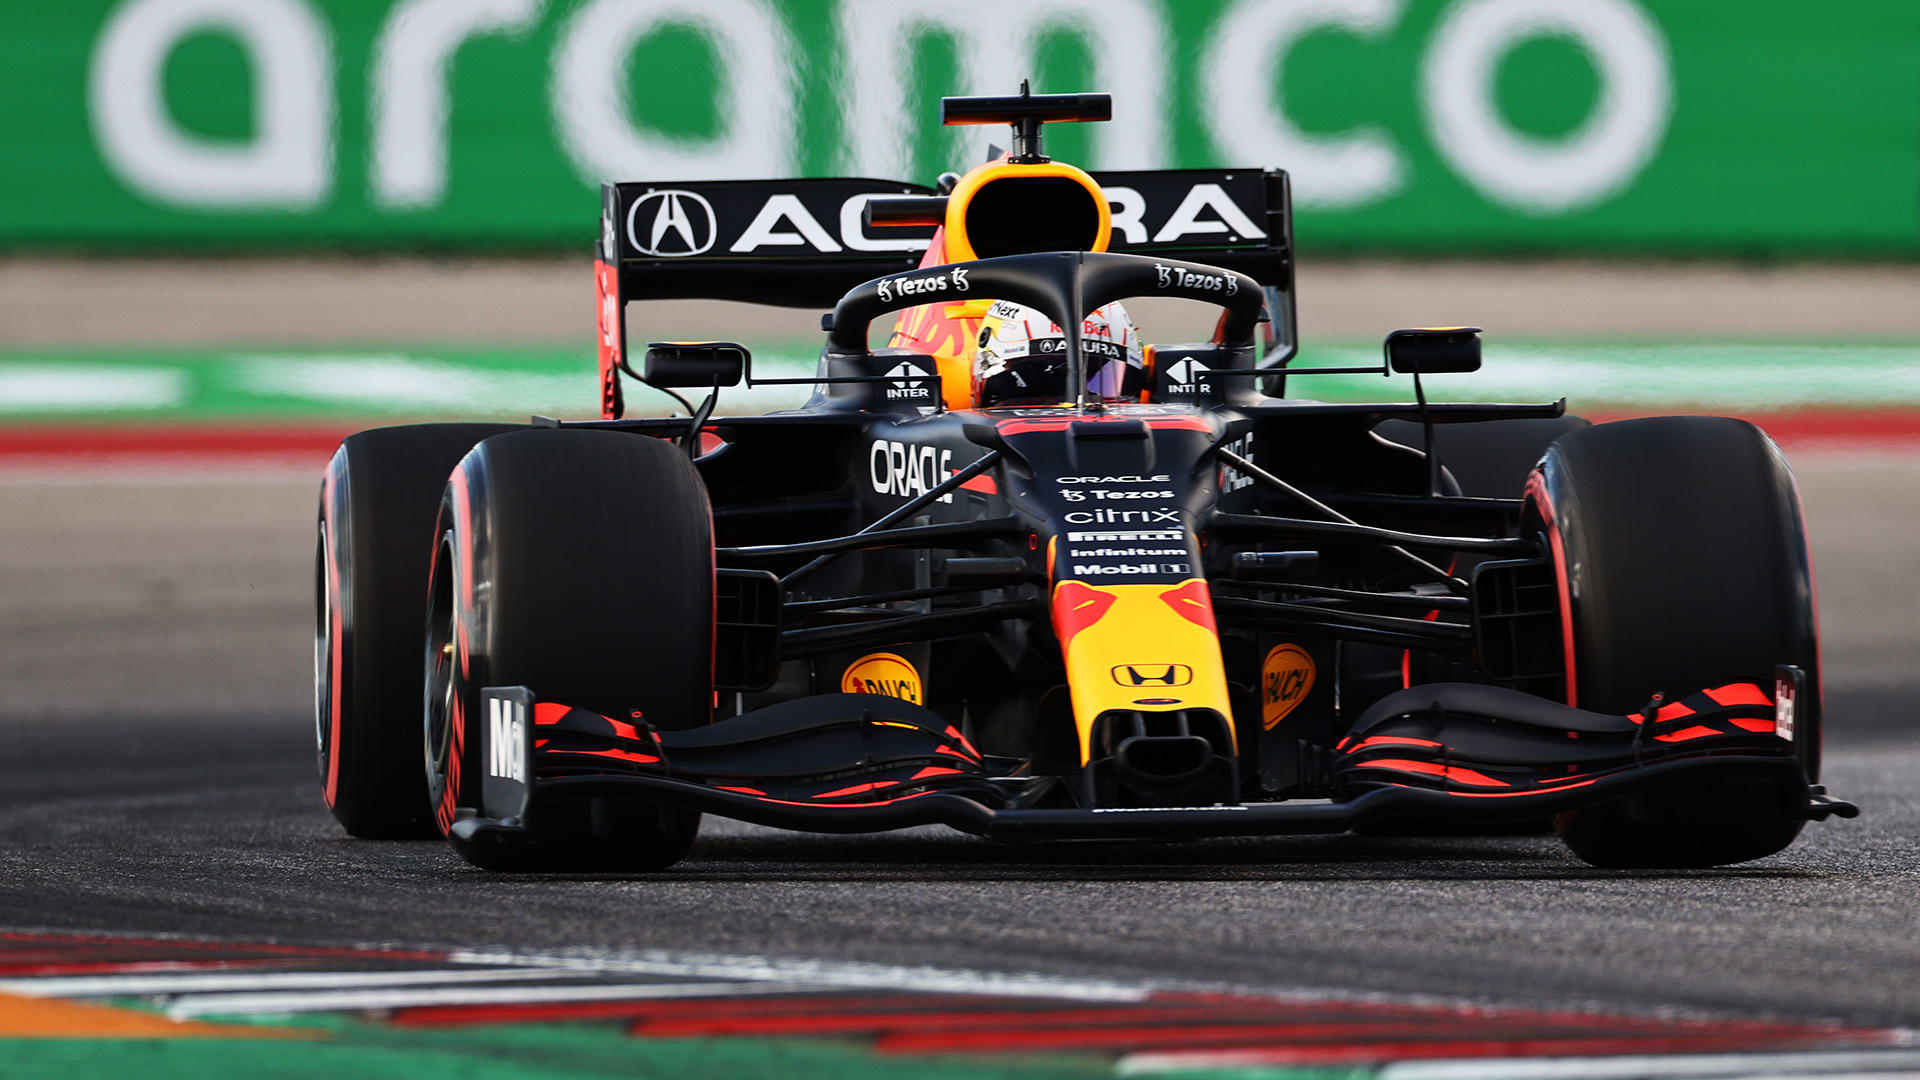 2021 United States Grand Prix qualifying report and highlights Verstappen beats Hamilton to pole position with sensational final lap in Austin Formula 1®